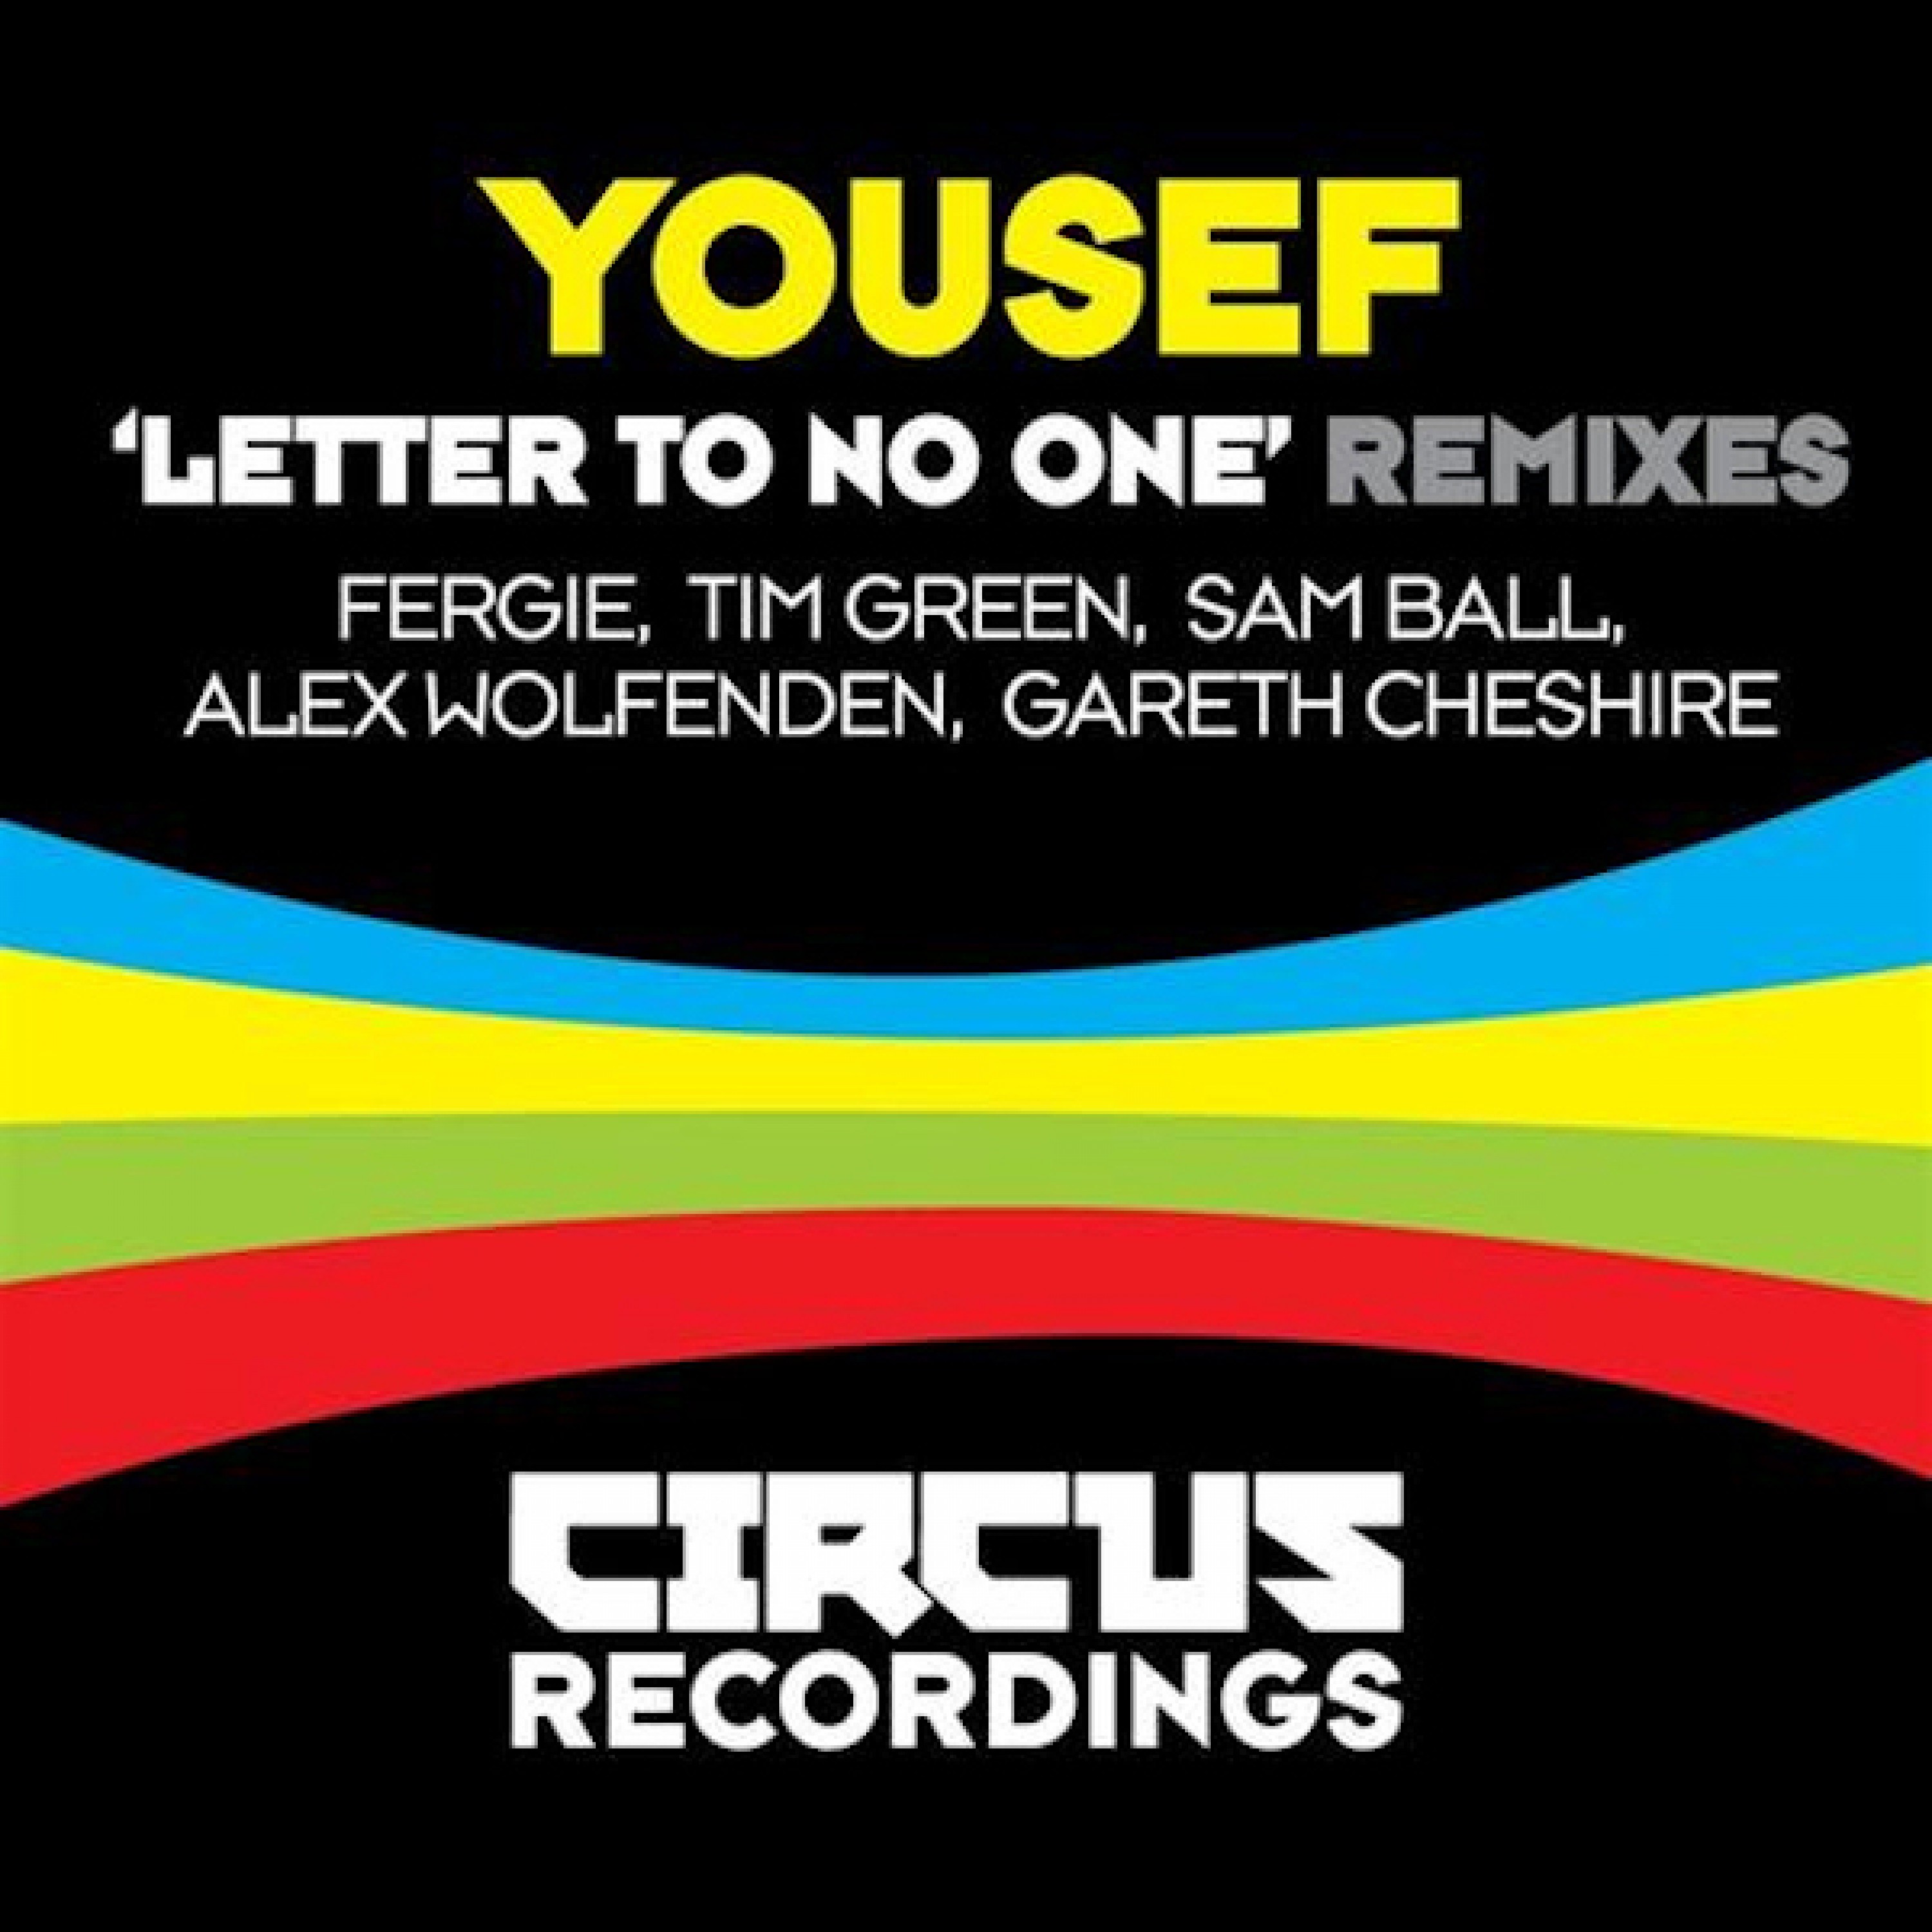 Letter to No One Remixes